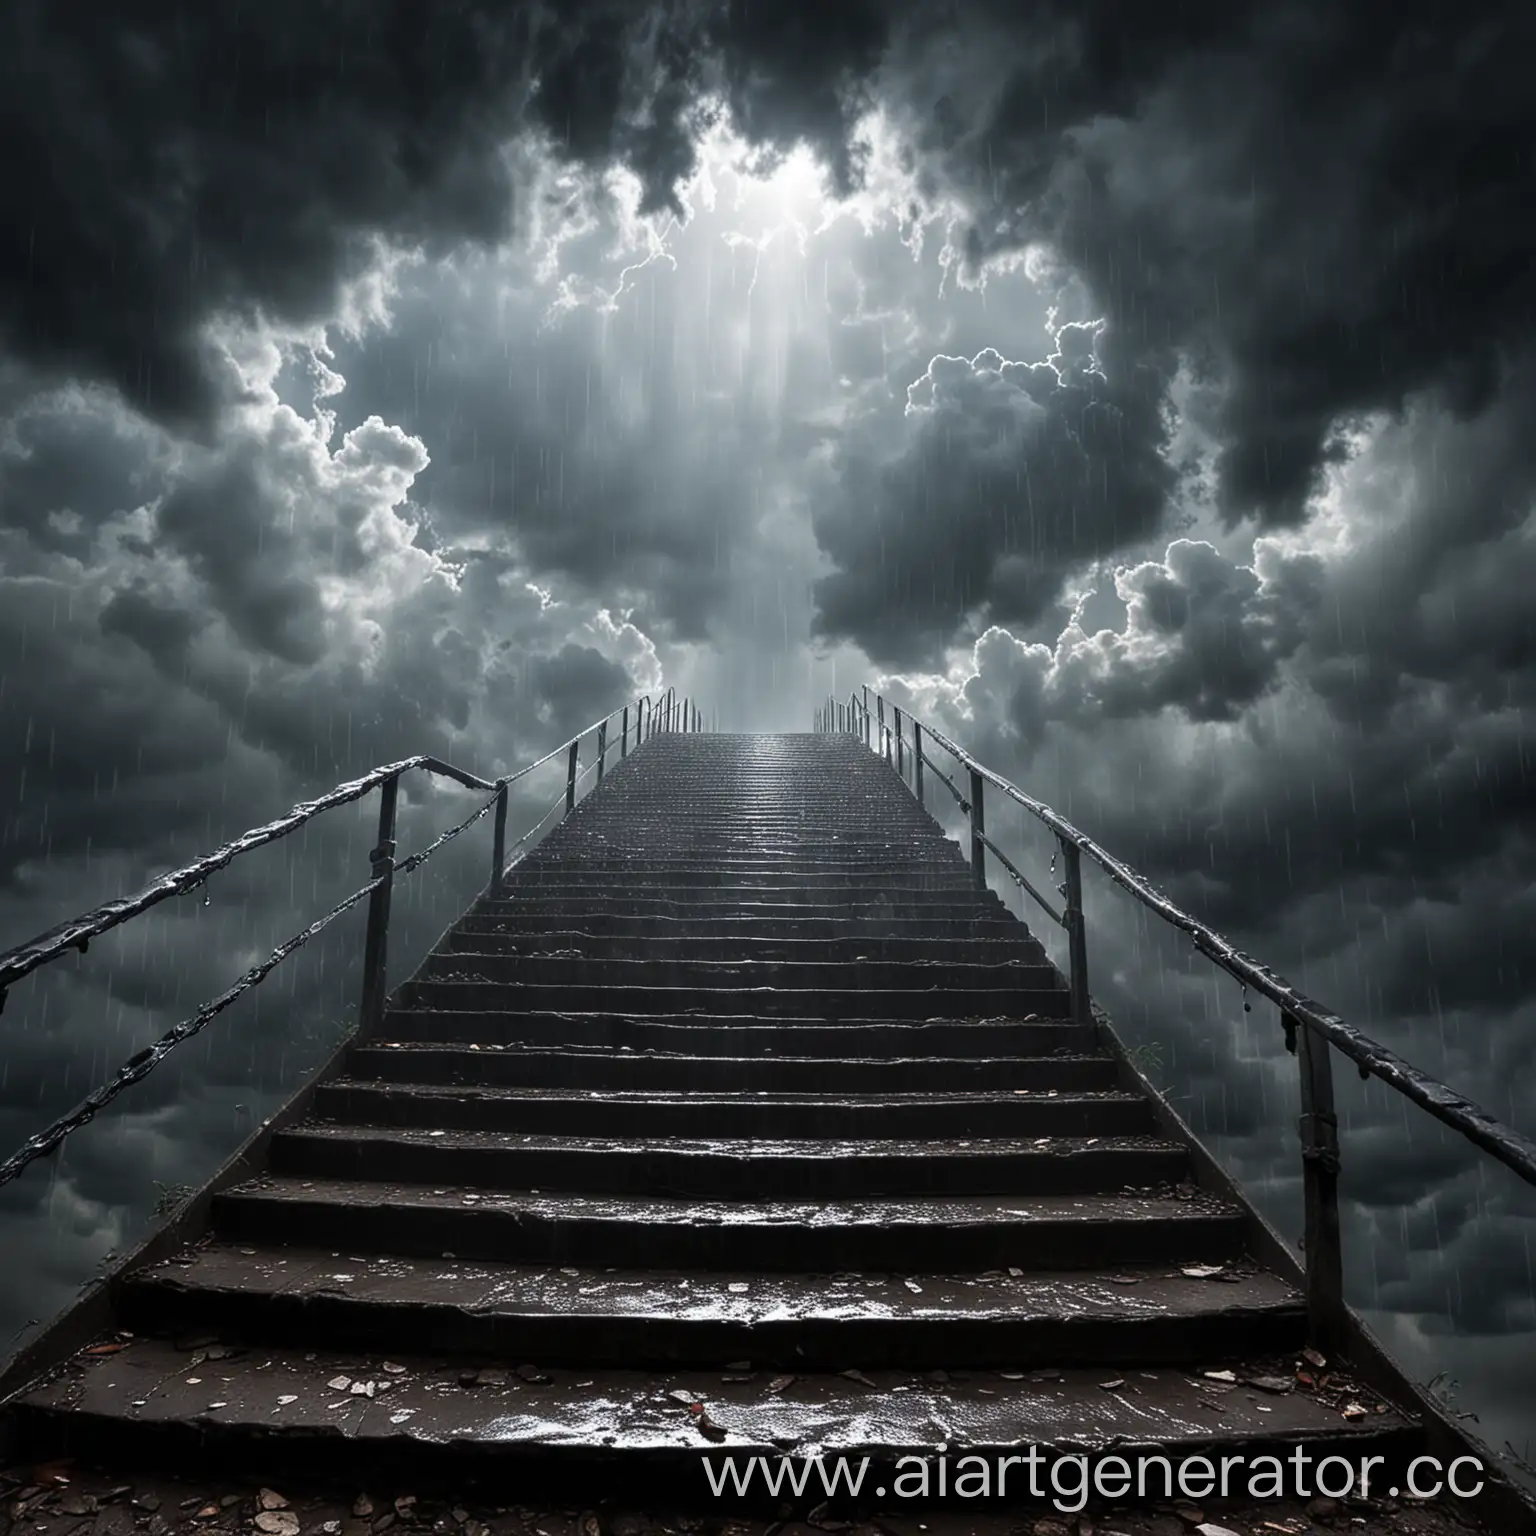 Majestic-Staircase-Leading-Towards-Light-Amidst-Stormy-Atmosphere